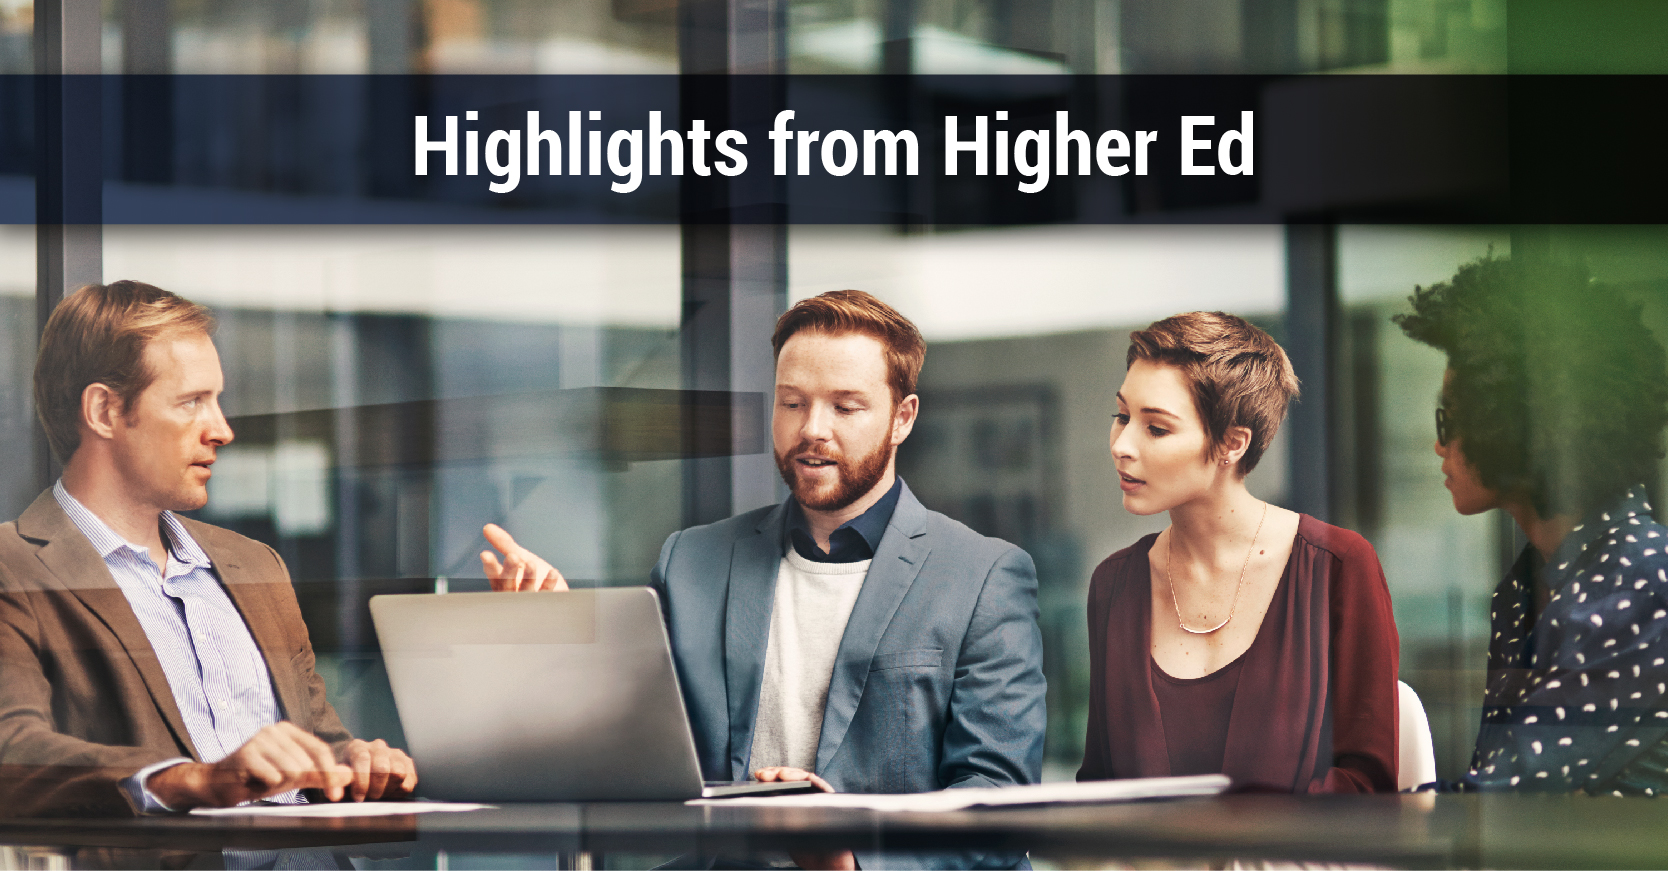 Highlights from Higher Ed: Common App Trends, Community College Applications, HBCUs, and Mental Health on Campus